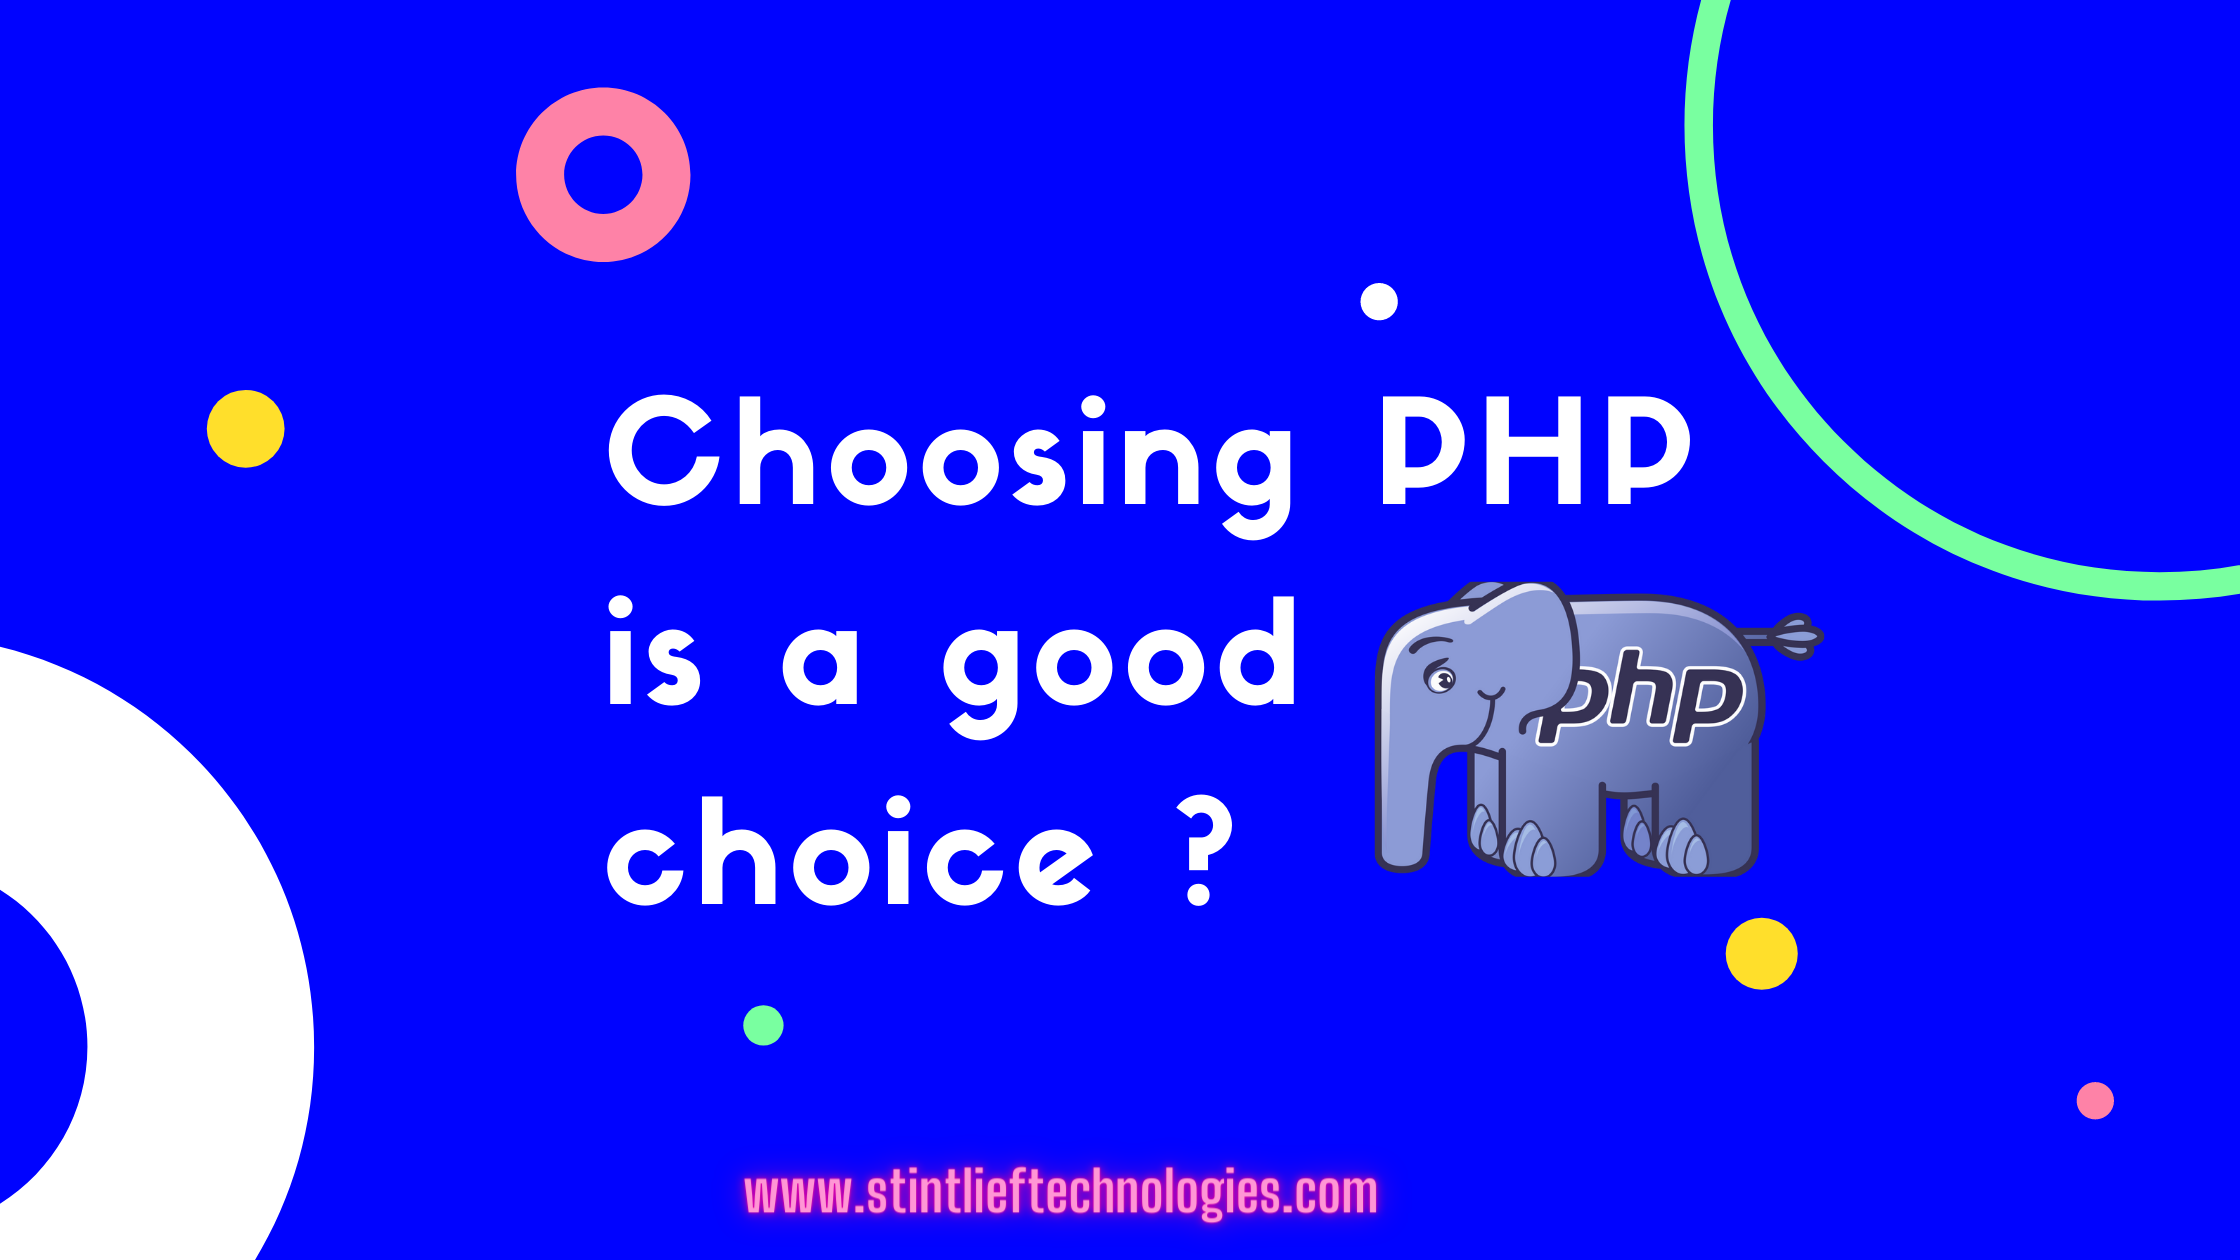 Why Choosing PHP is a good choice